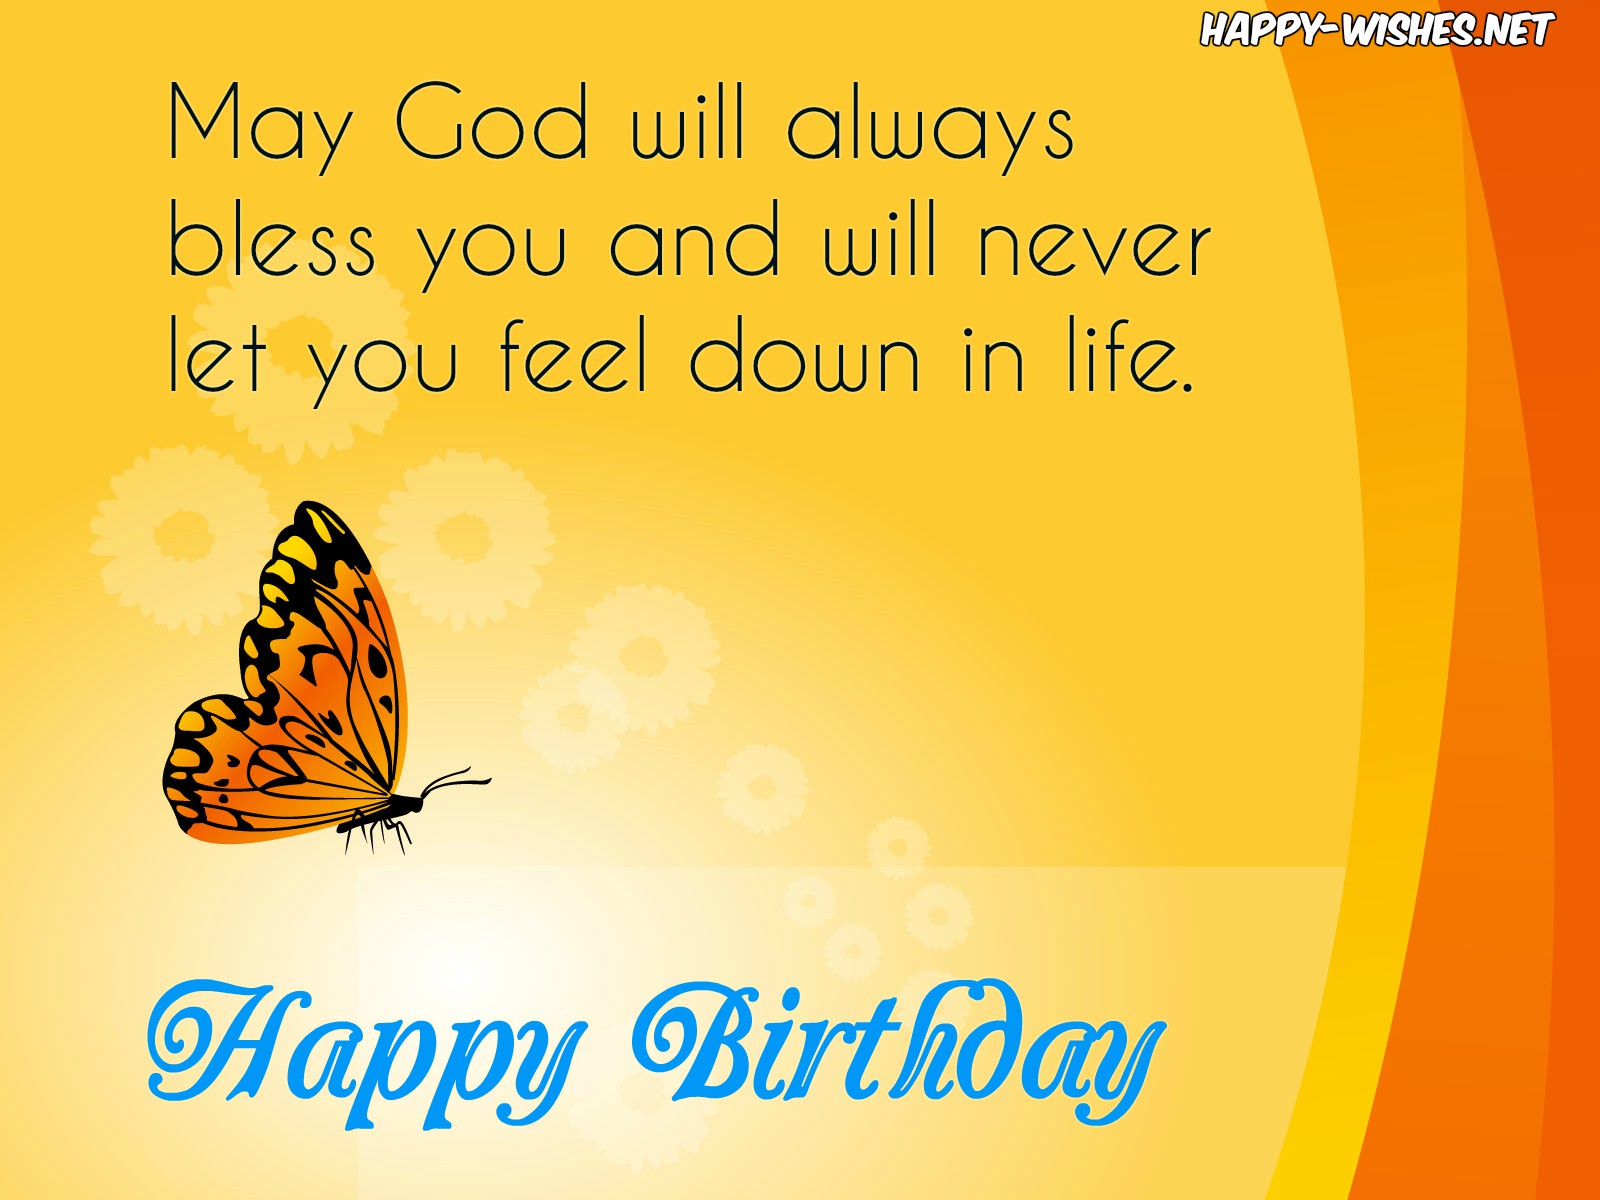 Happy Birthday wishes with butterfly images